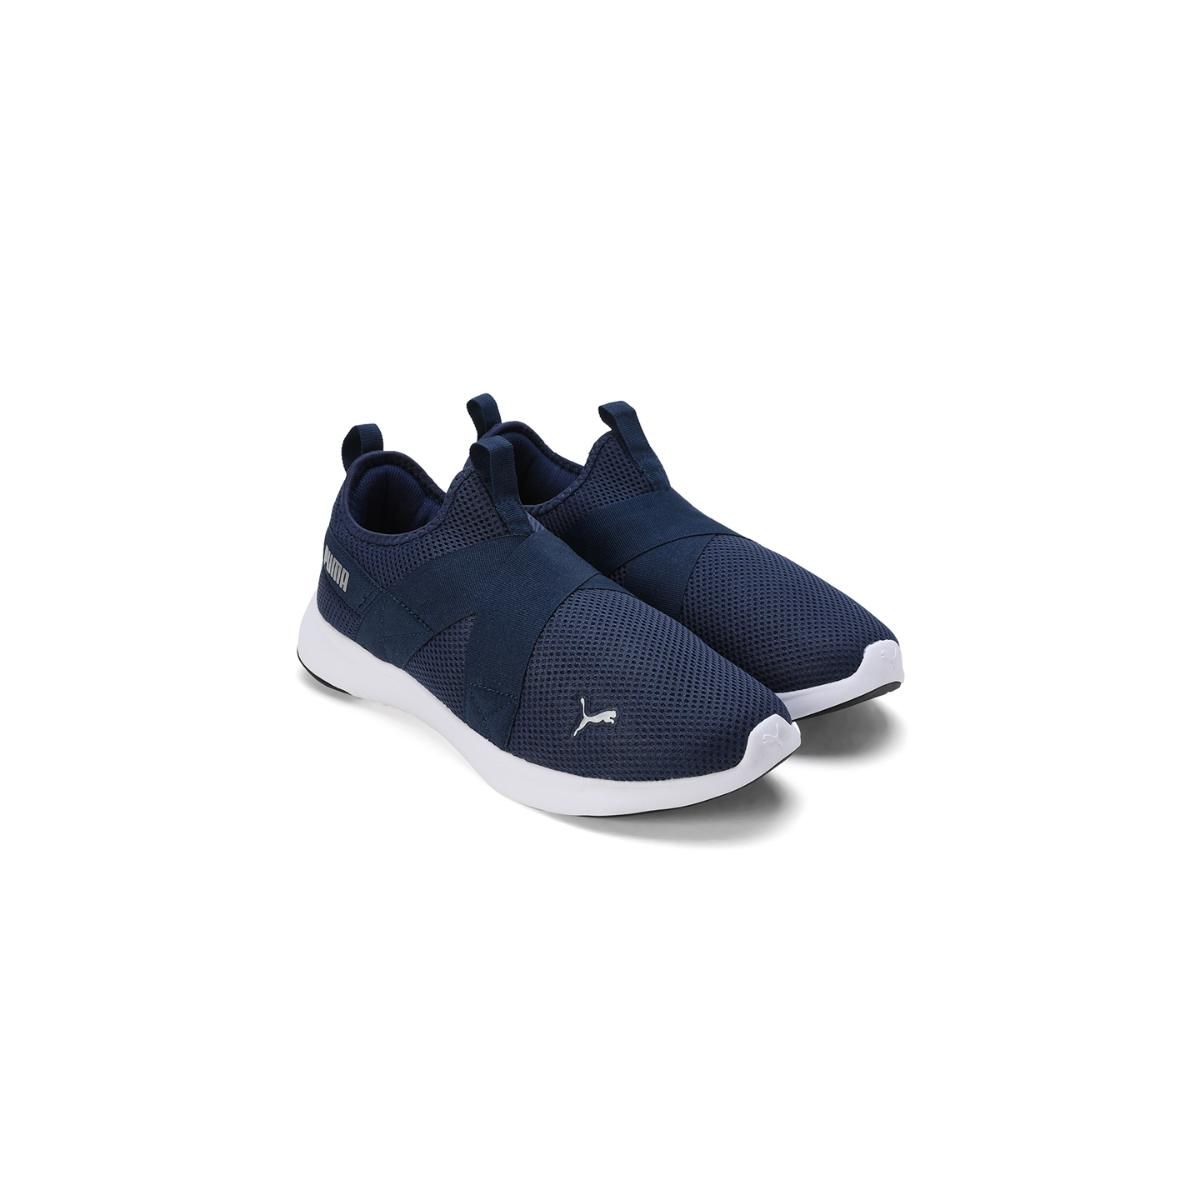 Puma Sports Shoes for Men: Best Puma Sports Shoes for Men in India for  Better Performance While Exercising - The Economic Times